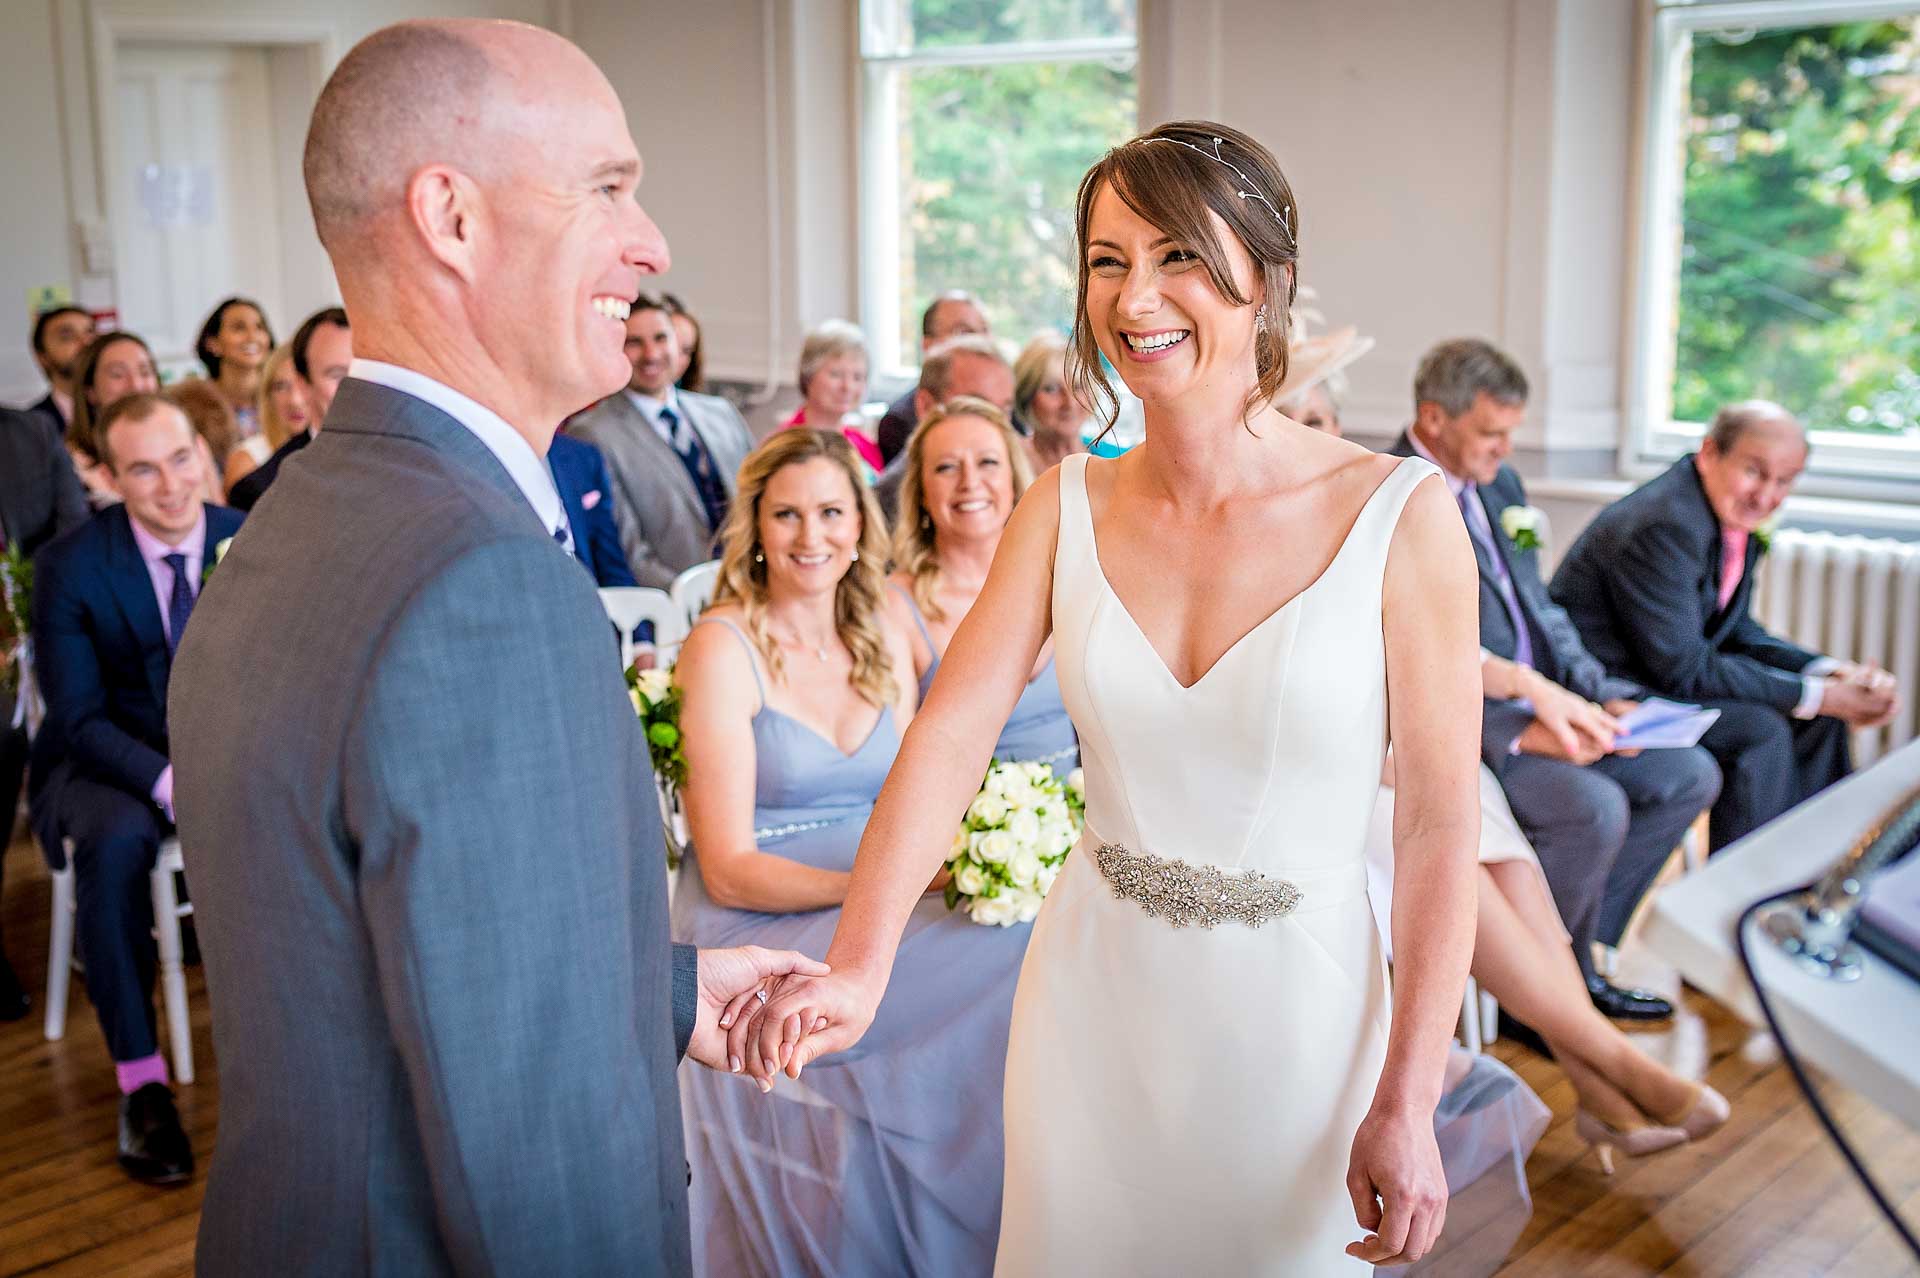 Bride laughing with groom at wedding ceremony